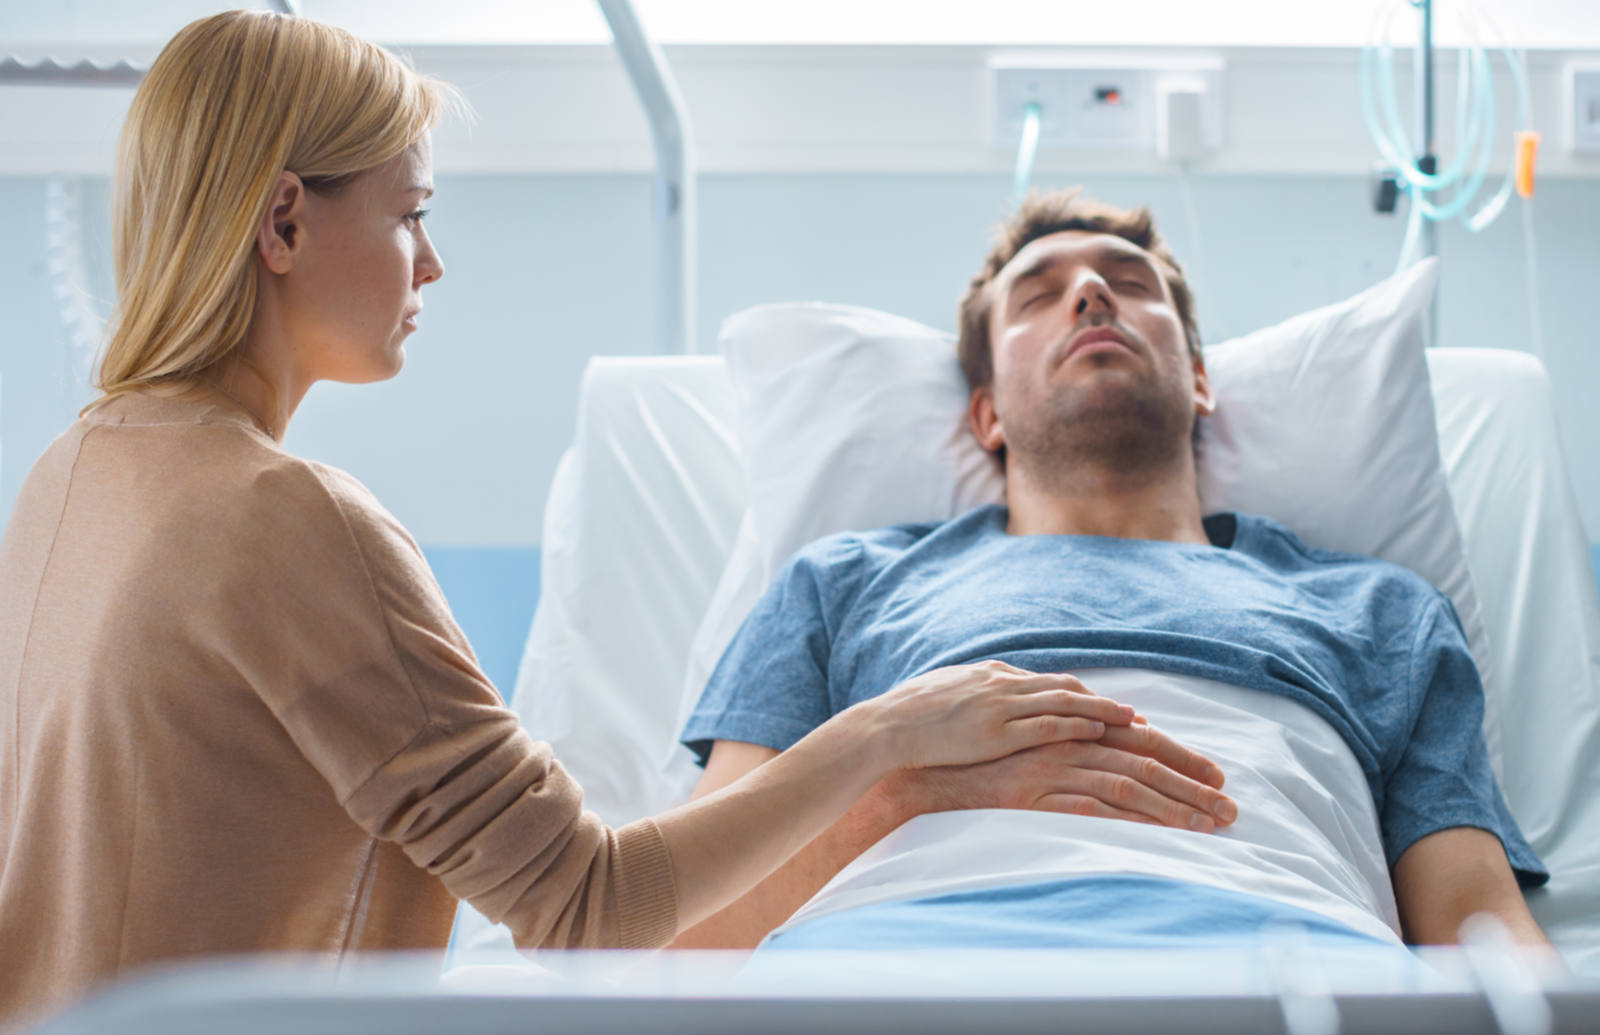 man laying in a hospital bed with a women sitting next to him